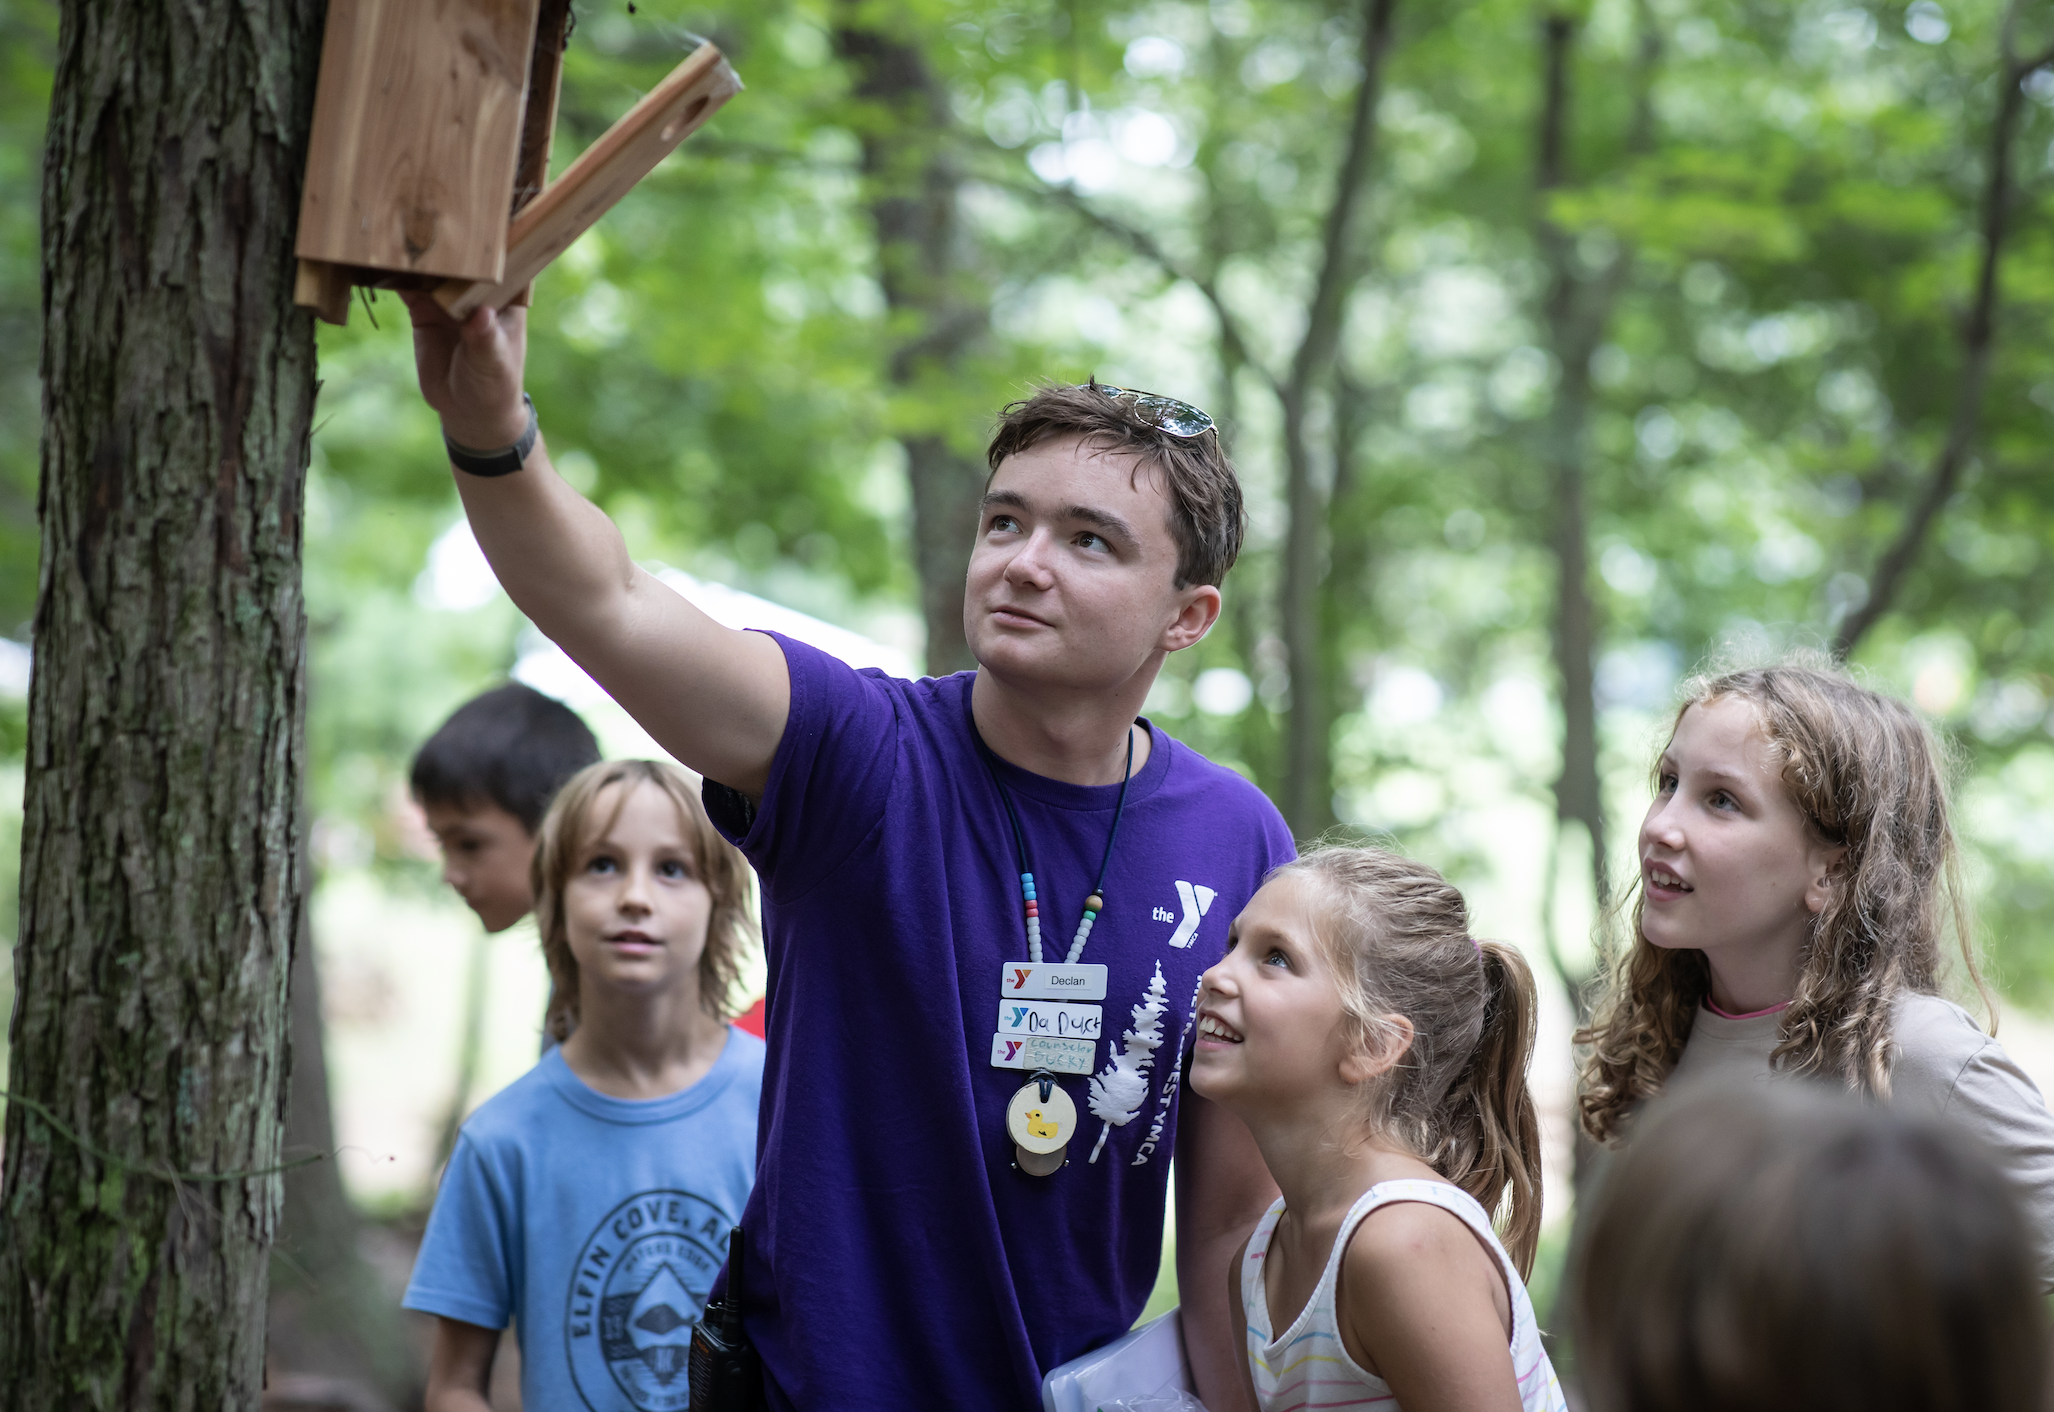 camp counselor shows birdhouse to campers